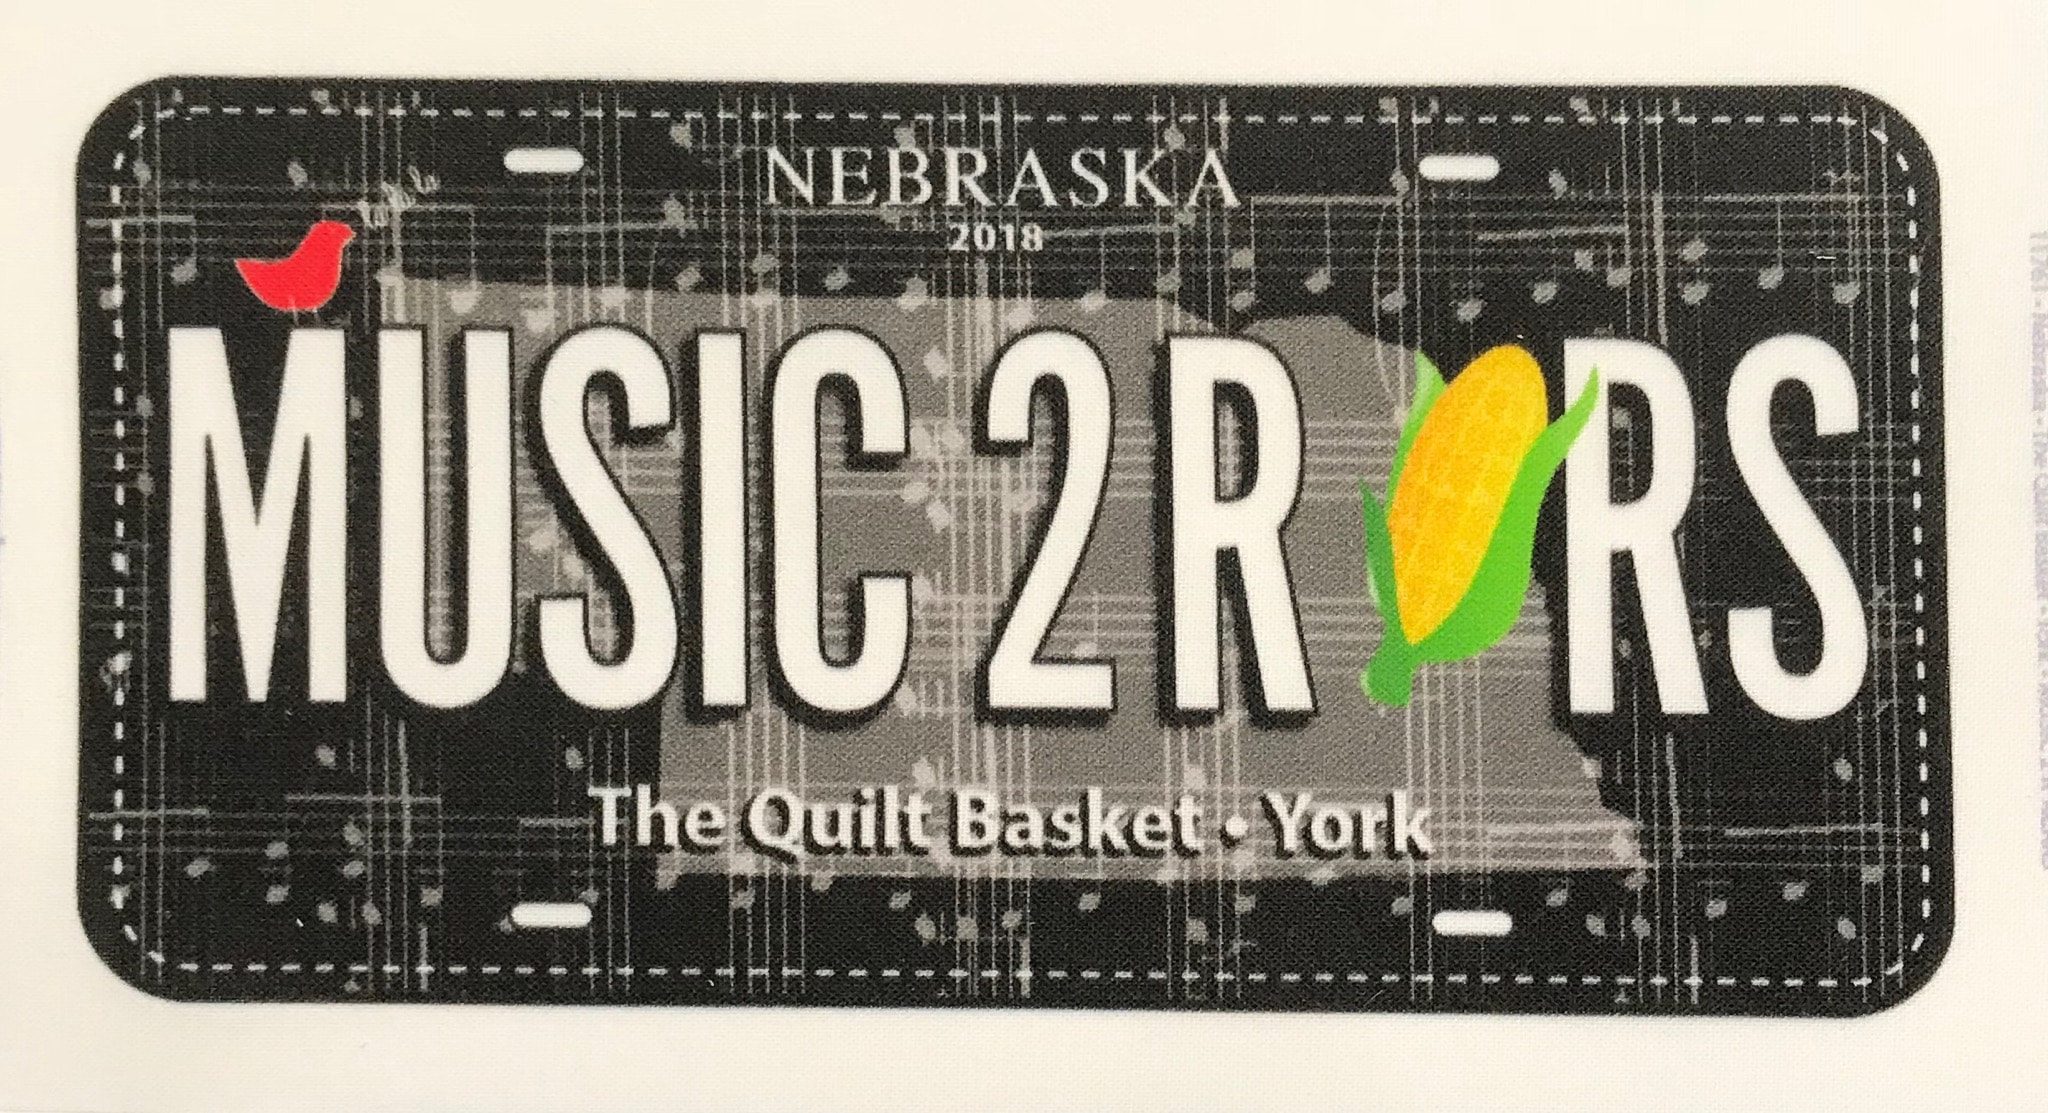 The Quilt Basket License Plate 2018